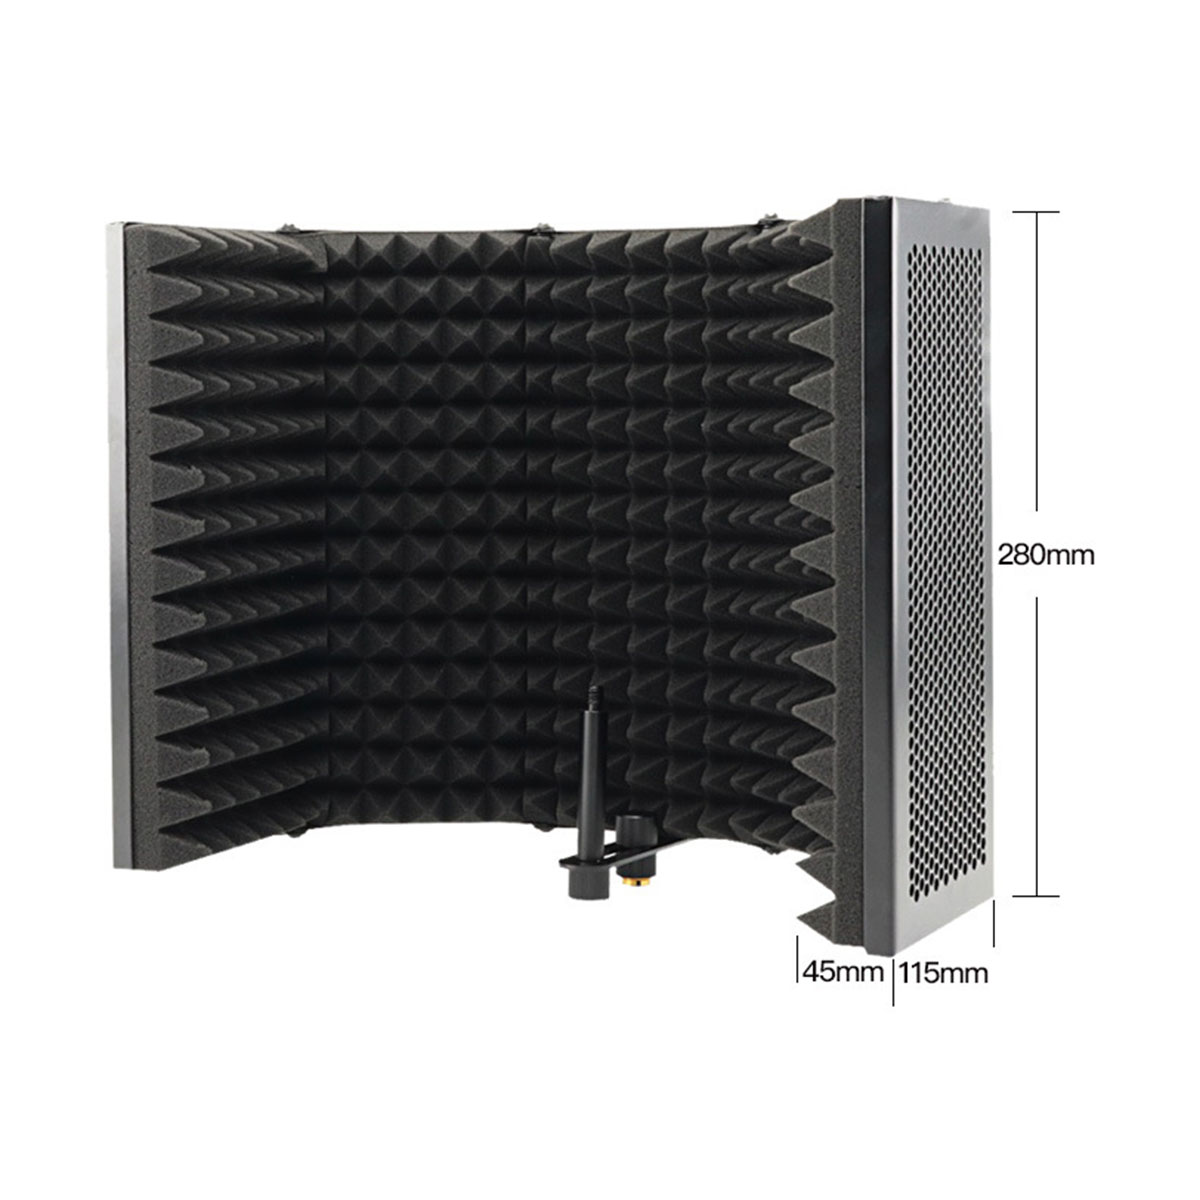 5-Panel-Foldable-Studio-Microphone-Isolation-Shield-Recording-Sound-Absorber-Foam-Panel-Support-Brac-1794721-3